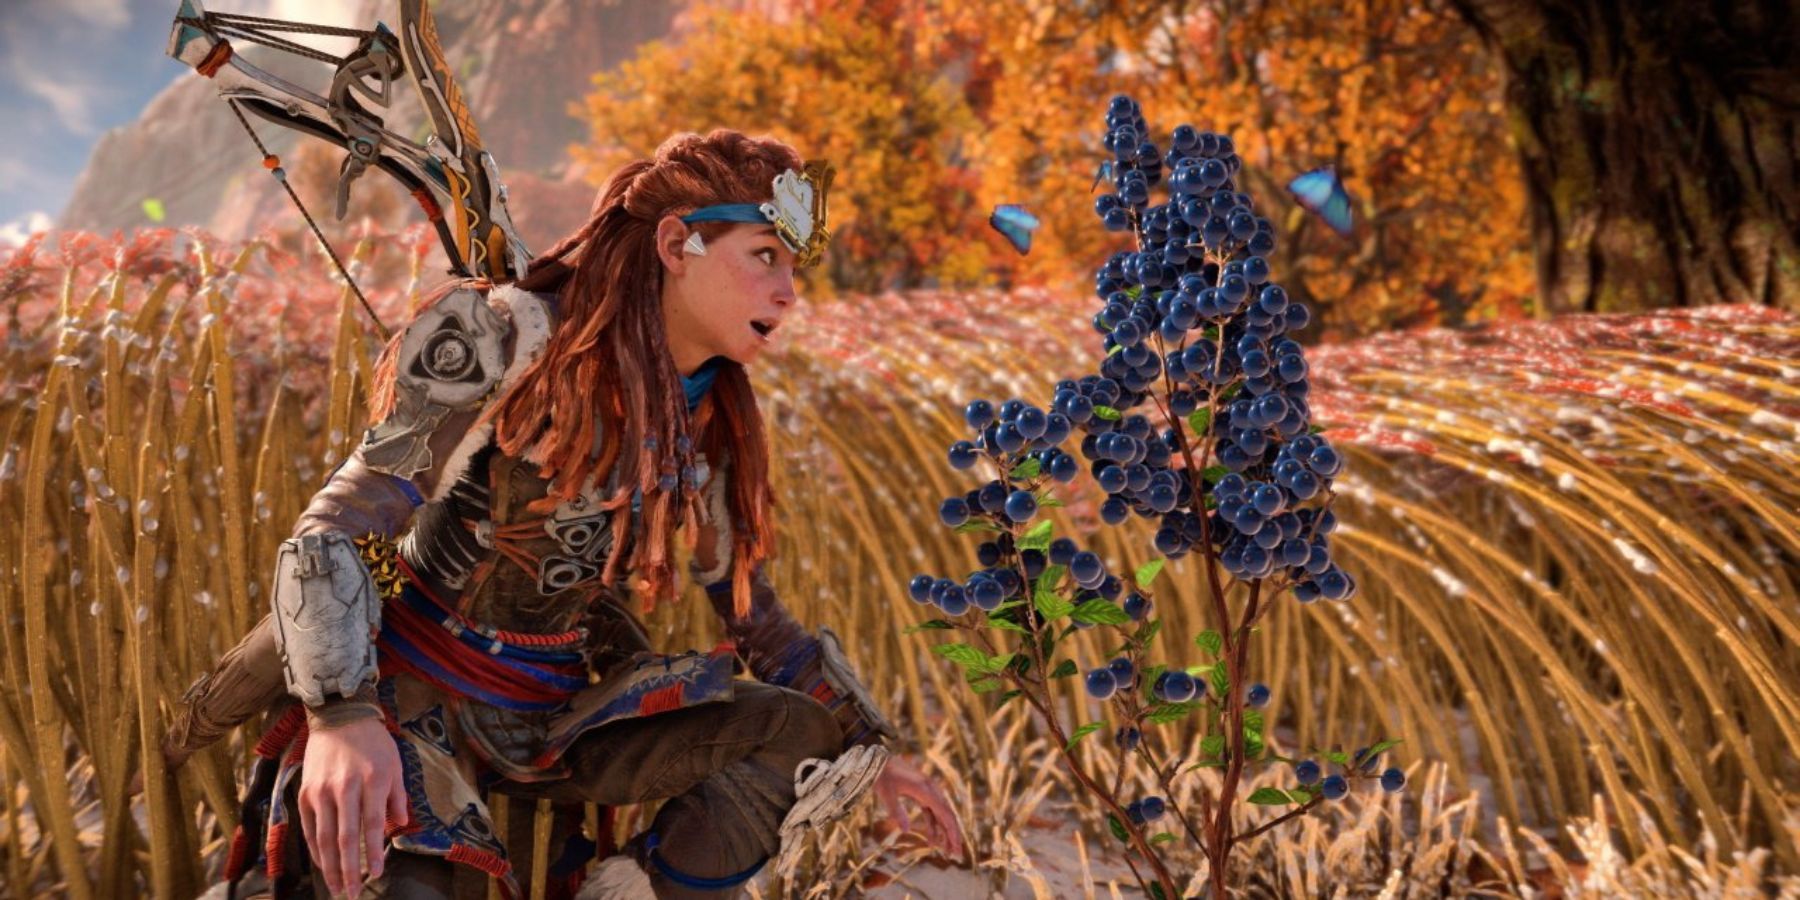 Aloy finding health